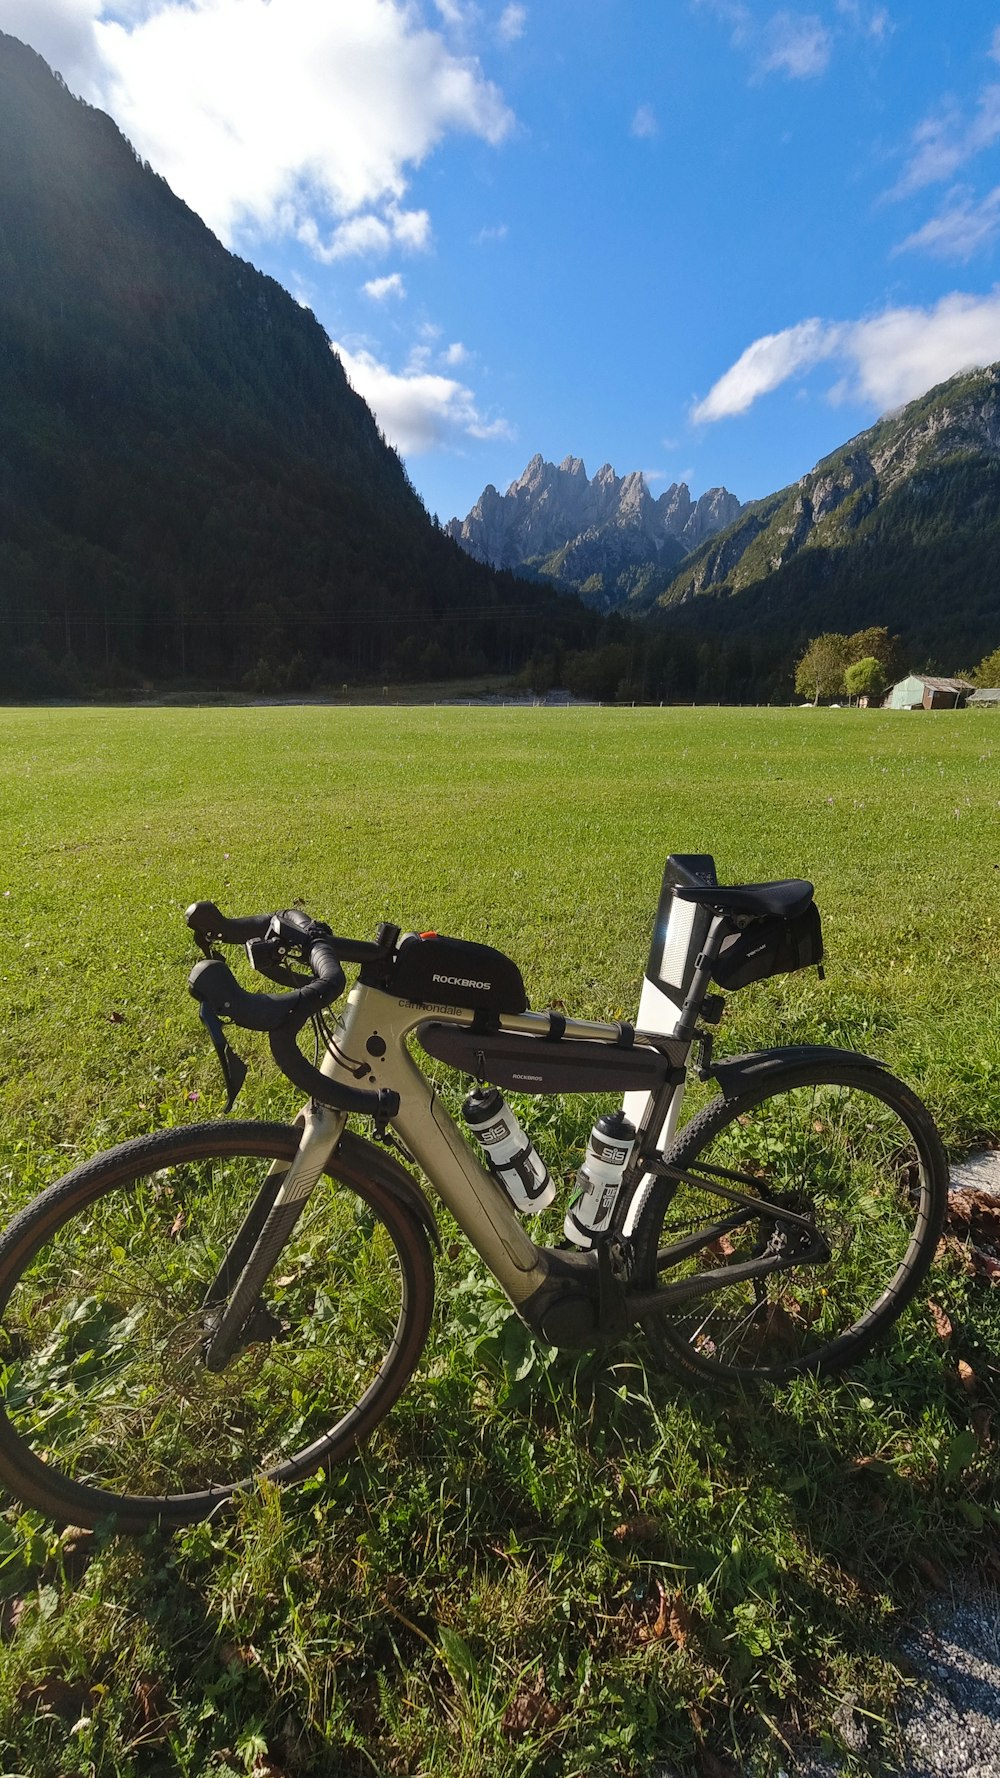 a bicycle parked in the grass in front of a mountain